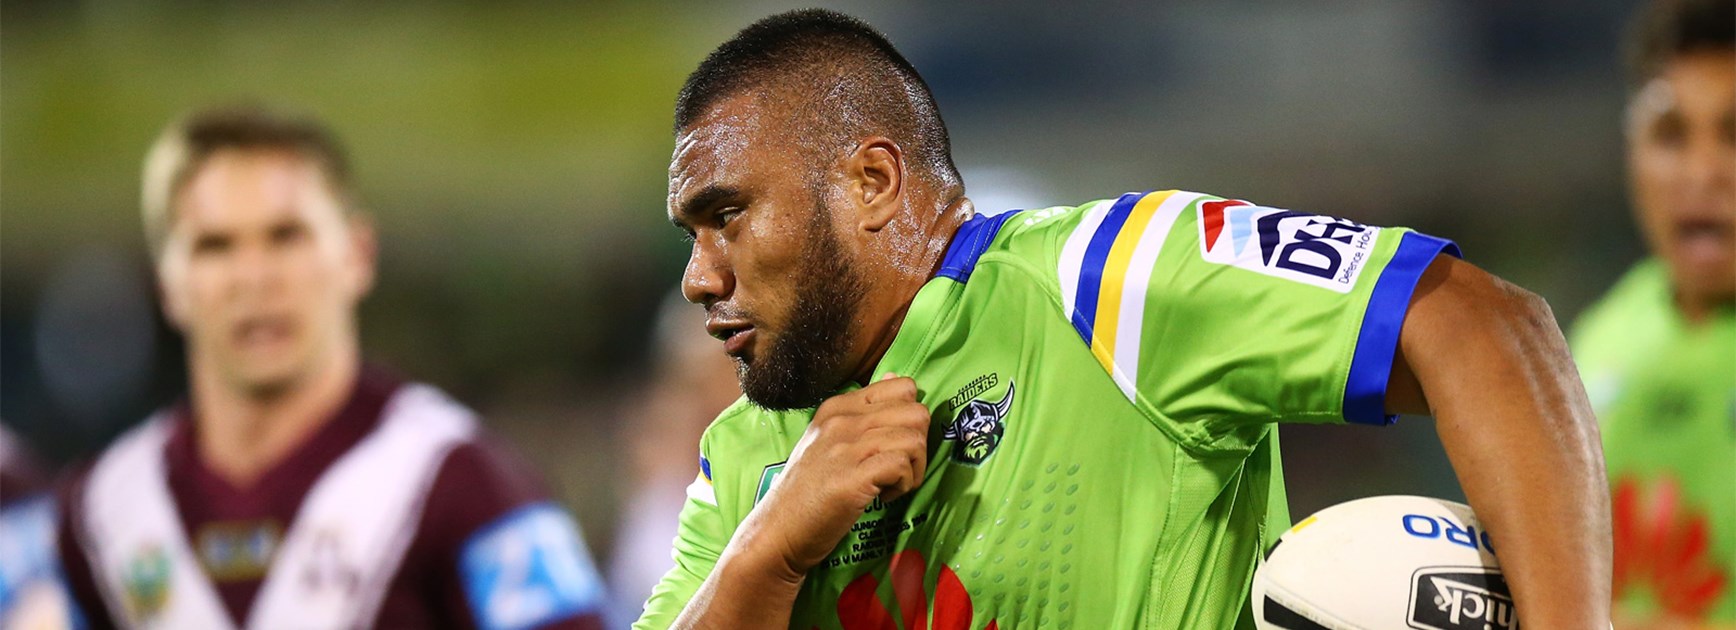 Junior Paulo is already proving to be a very handy acquisition for the Canberra Raiders.